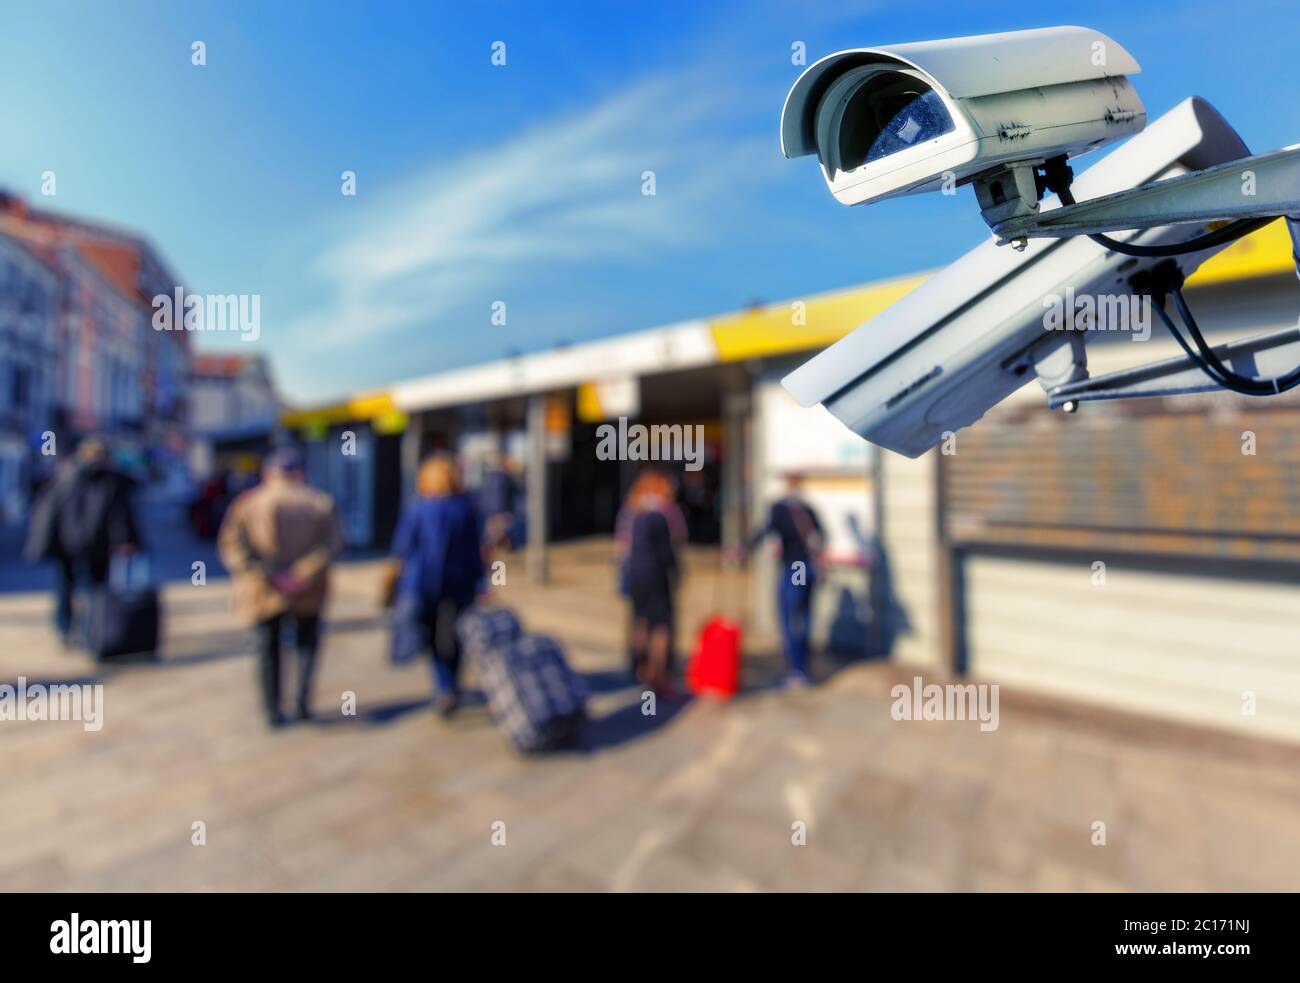 security CCTV camera with boat station on blurry background Stock Photo